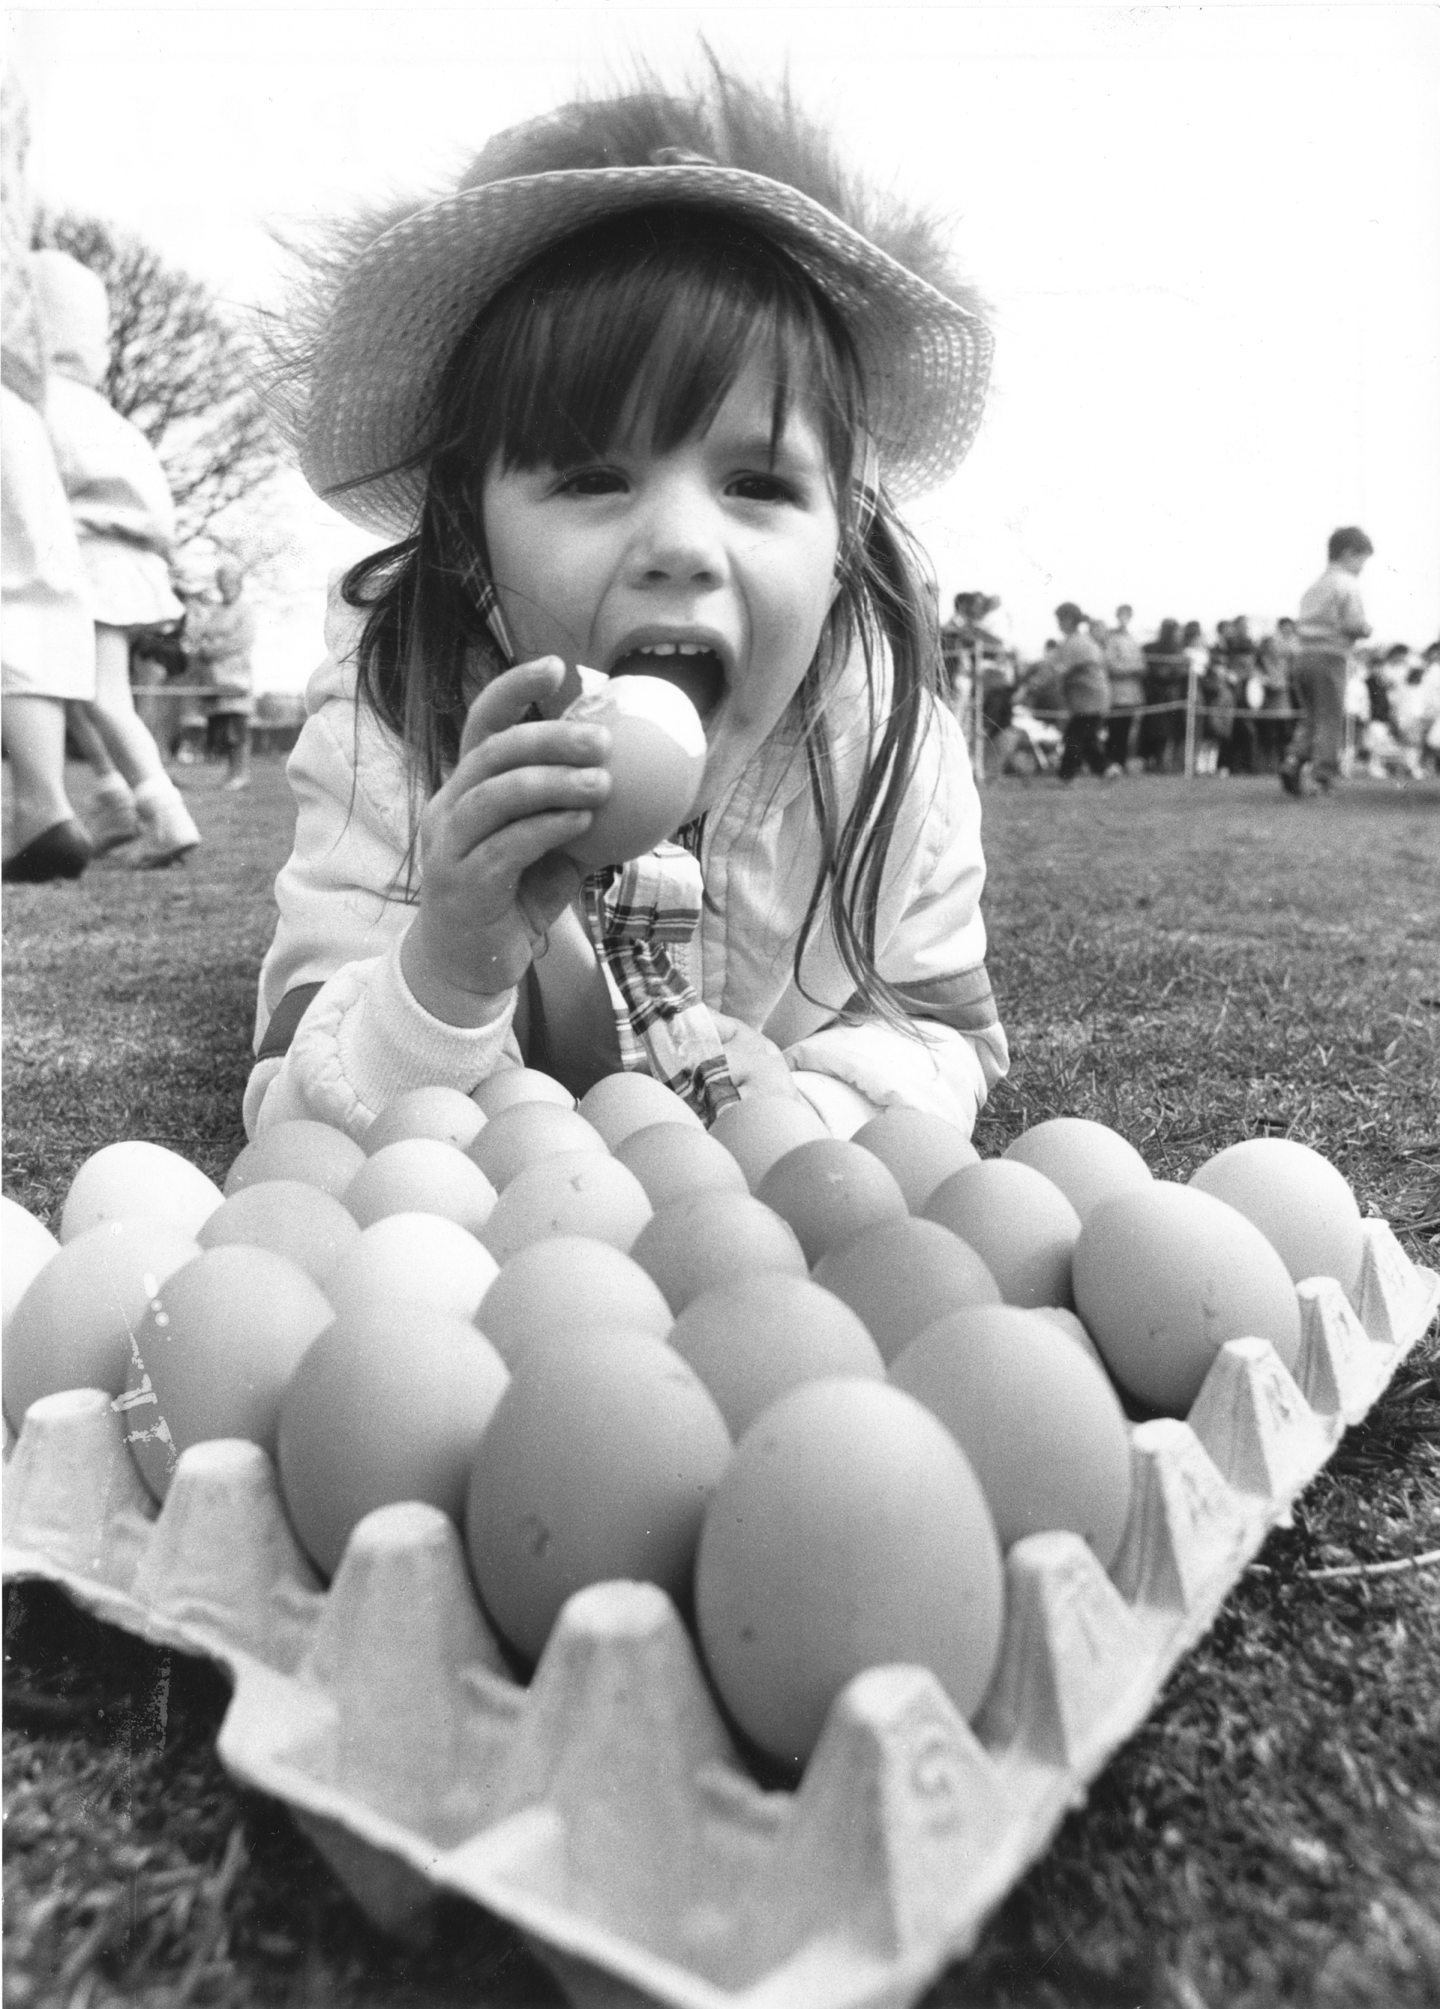 Three-year-old Melanie Gray from Bridge of Don must have missed breakfast! She was taking part in a special Easter holiday event for children at Duthie Park in 1987 where hundreds of children decorated eggs and rolled them down the slopes.